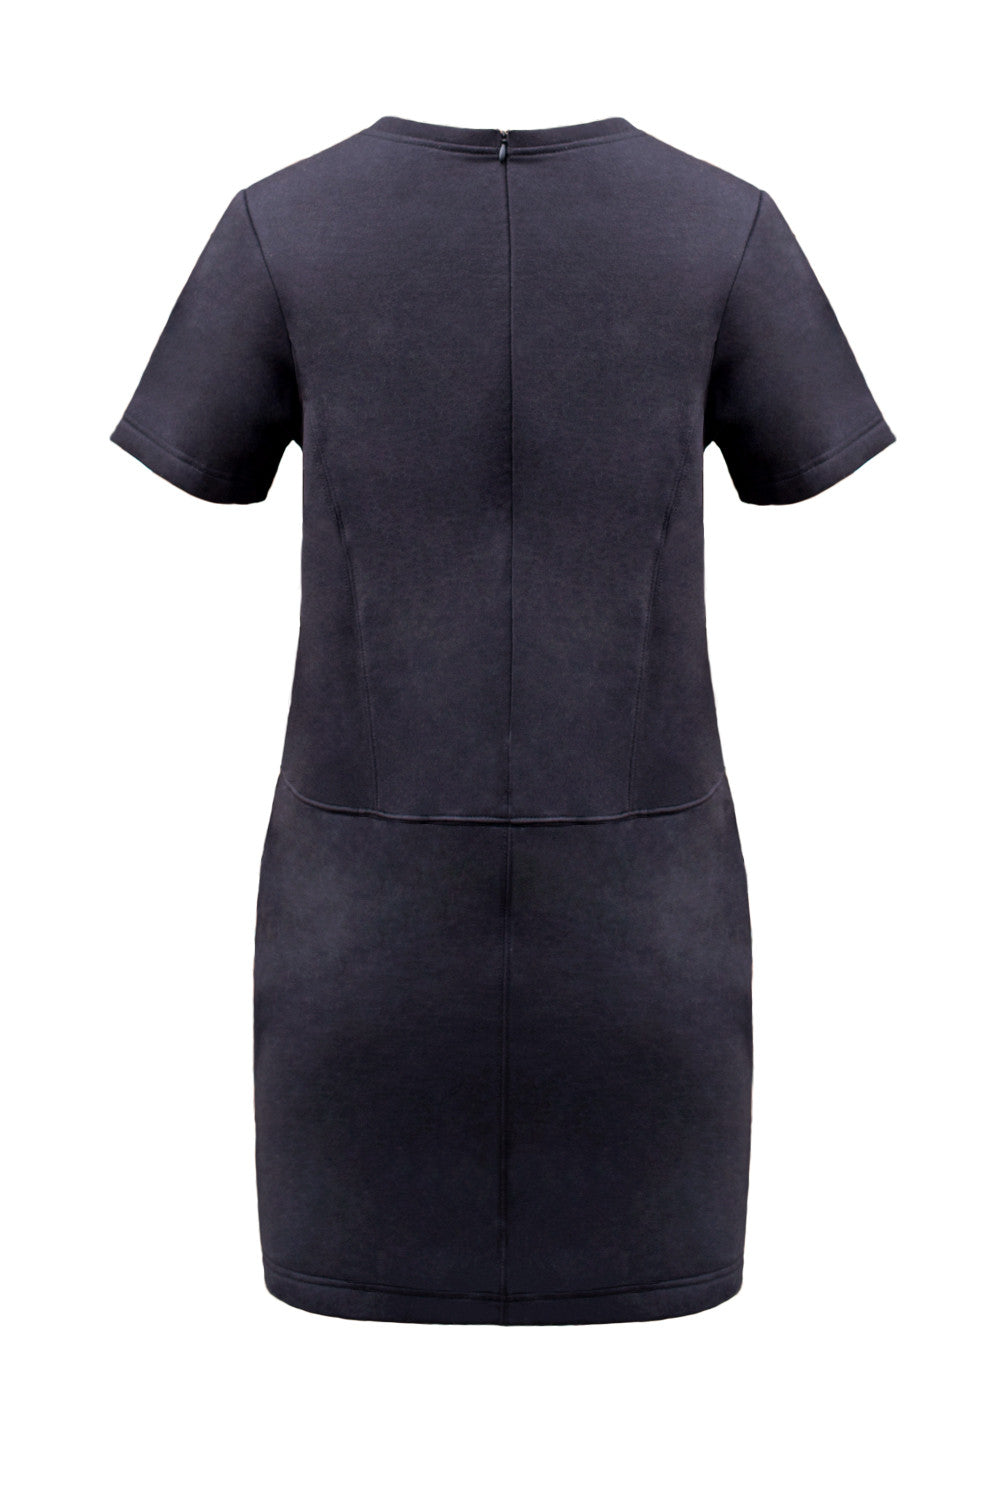 Back view of black Daphne dress by Hanhny on mannequin